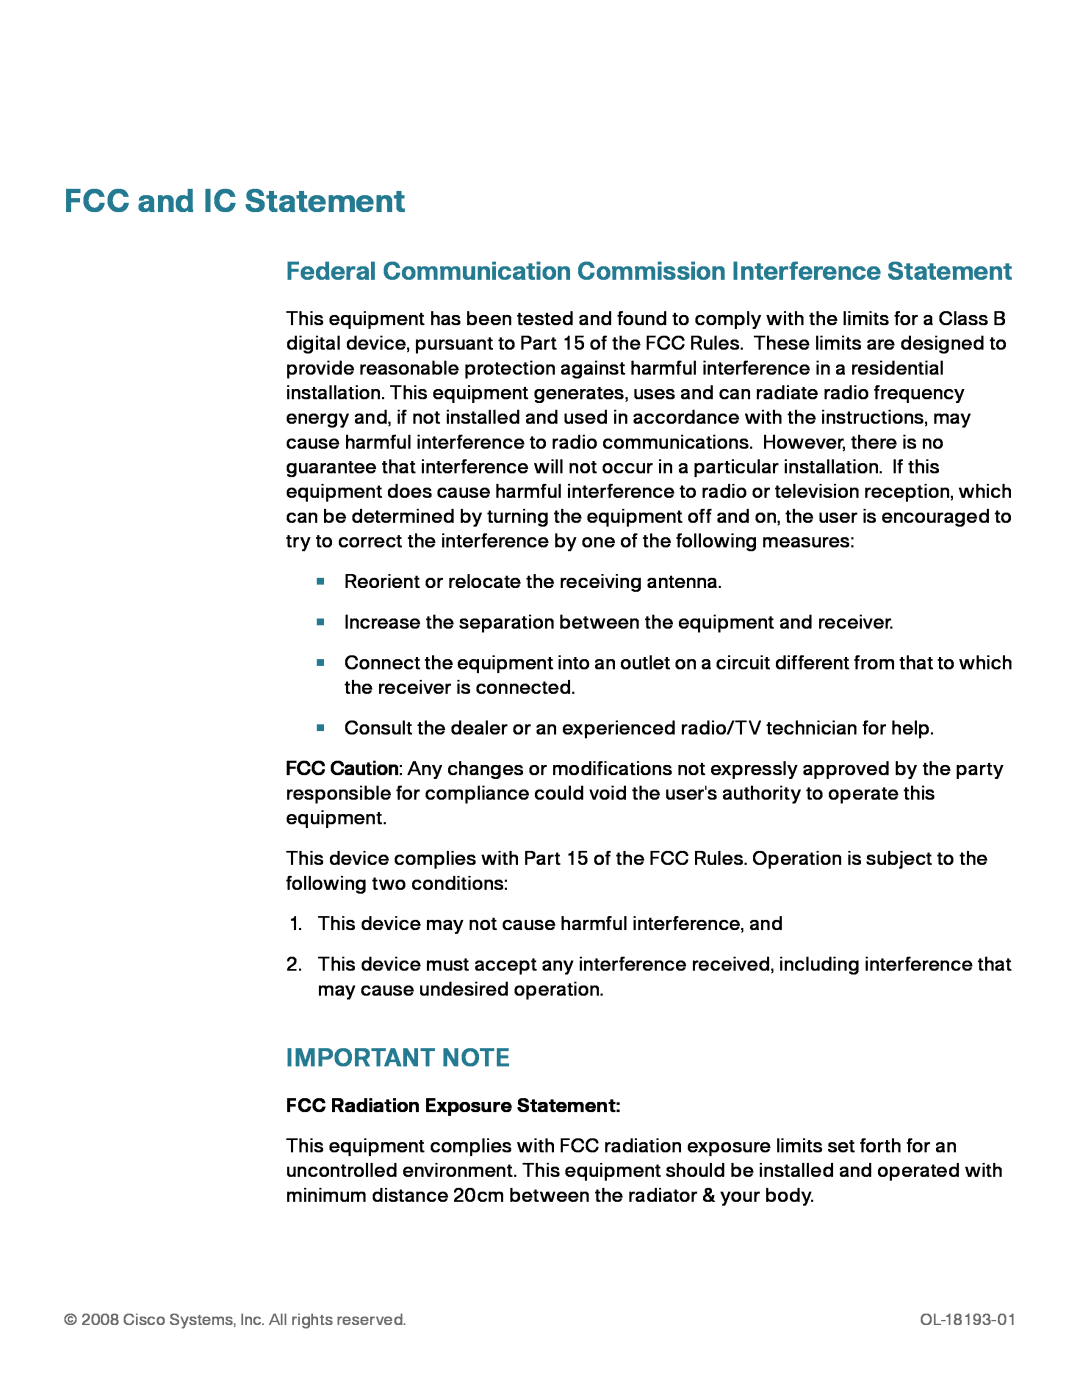 Cisco Systems SPA525G manual FCC and IC Statement, Federal Communication Commission Interference Statement, Important Note 